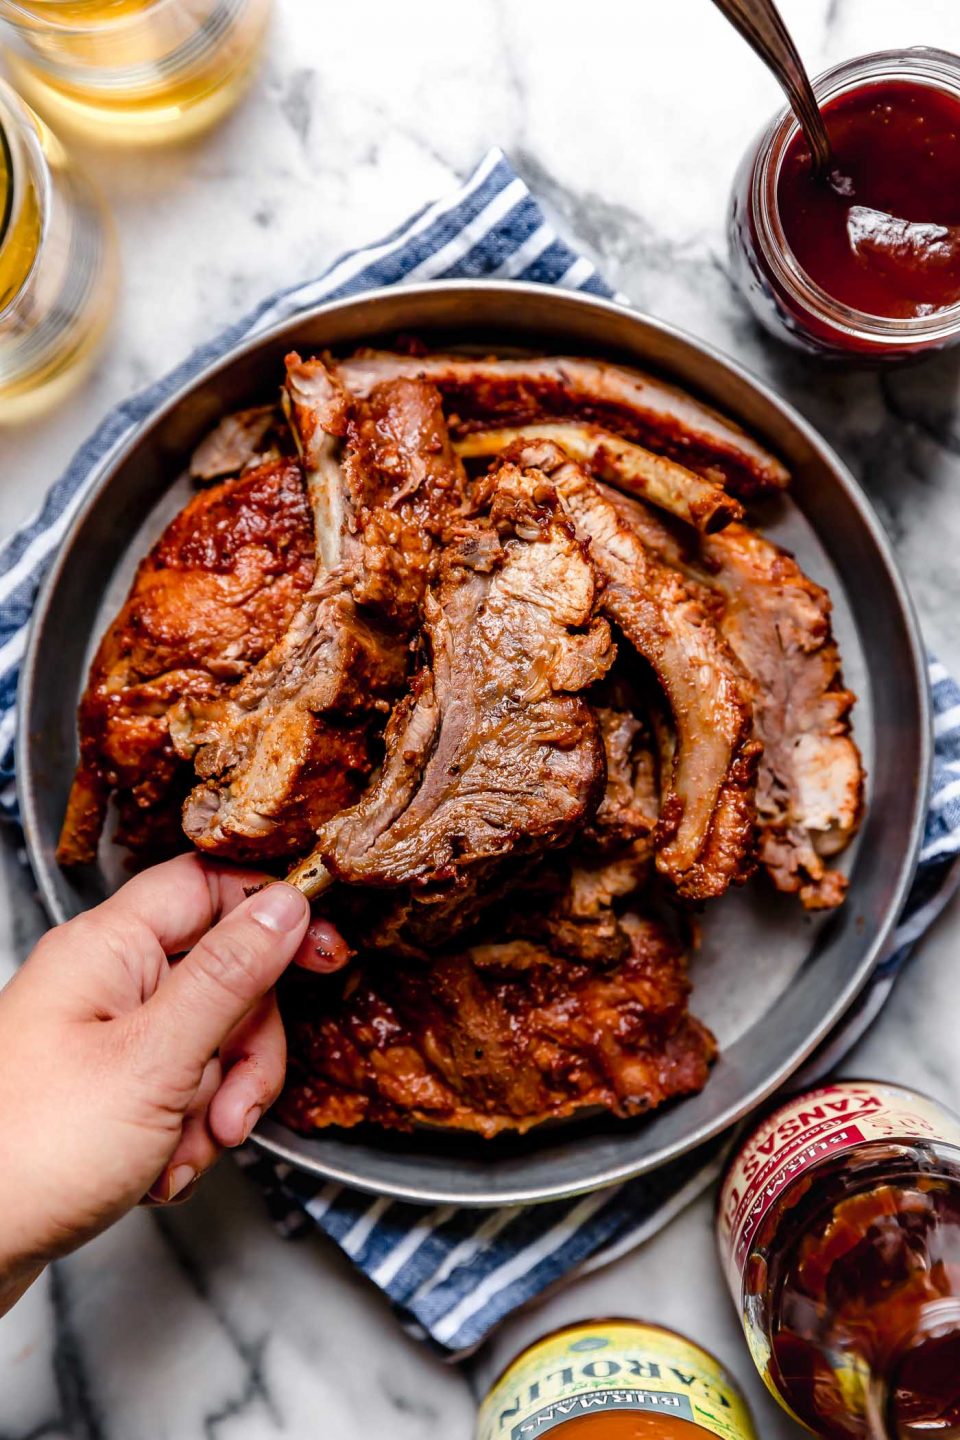 A woman's hand is picking up a single baby back ribs served with other baby back ribs in a round metal dish, with BBQ sauce & beer. The dish is sitting on a blue & white striped linen atop a white marble surface. 